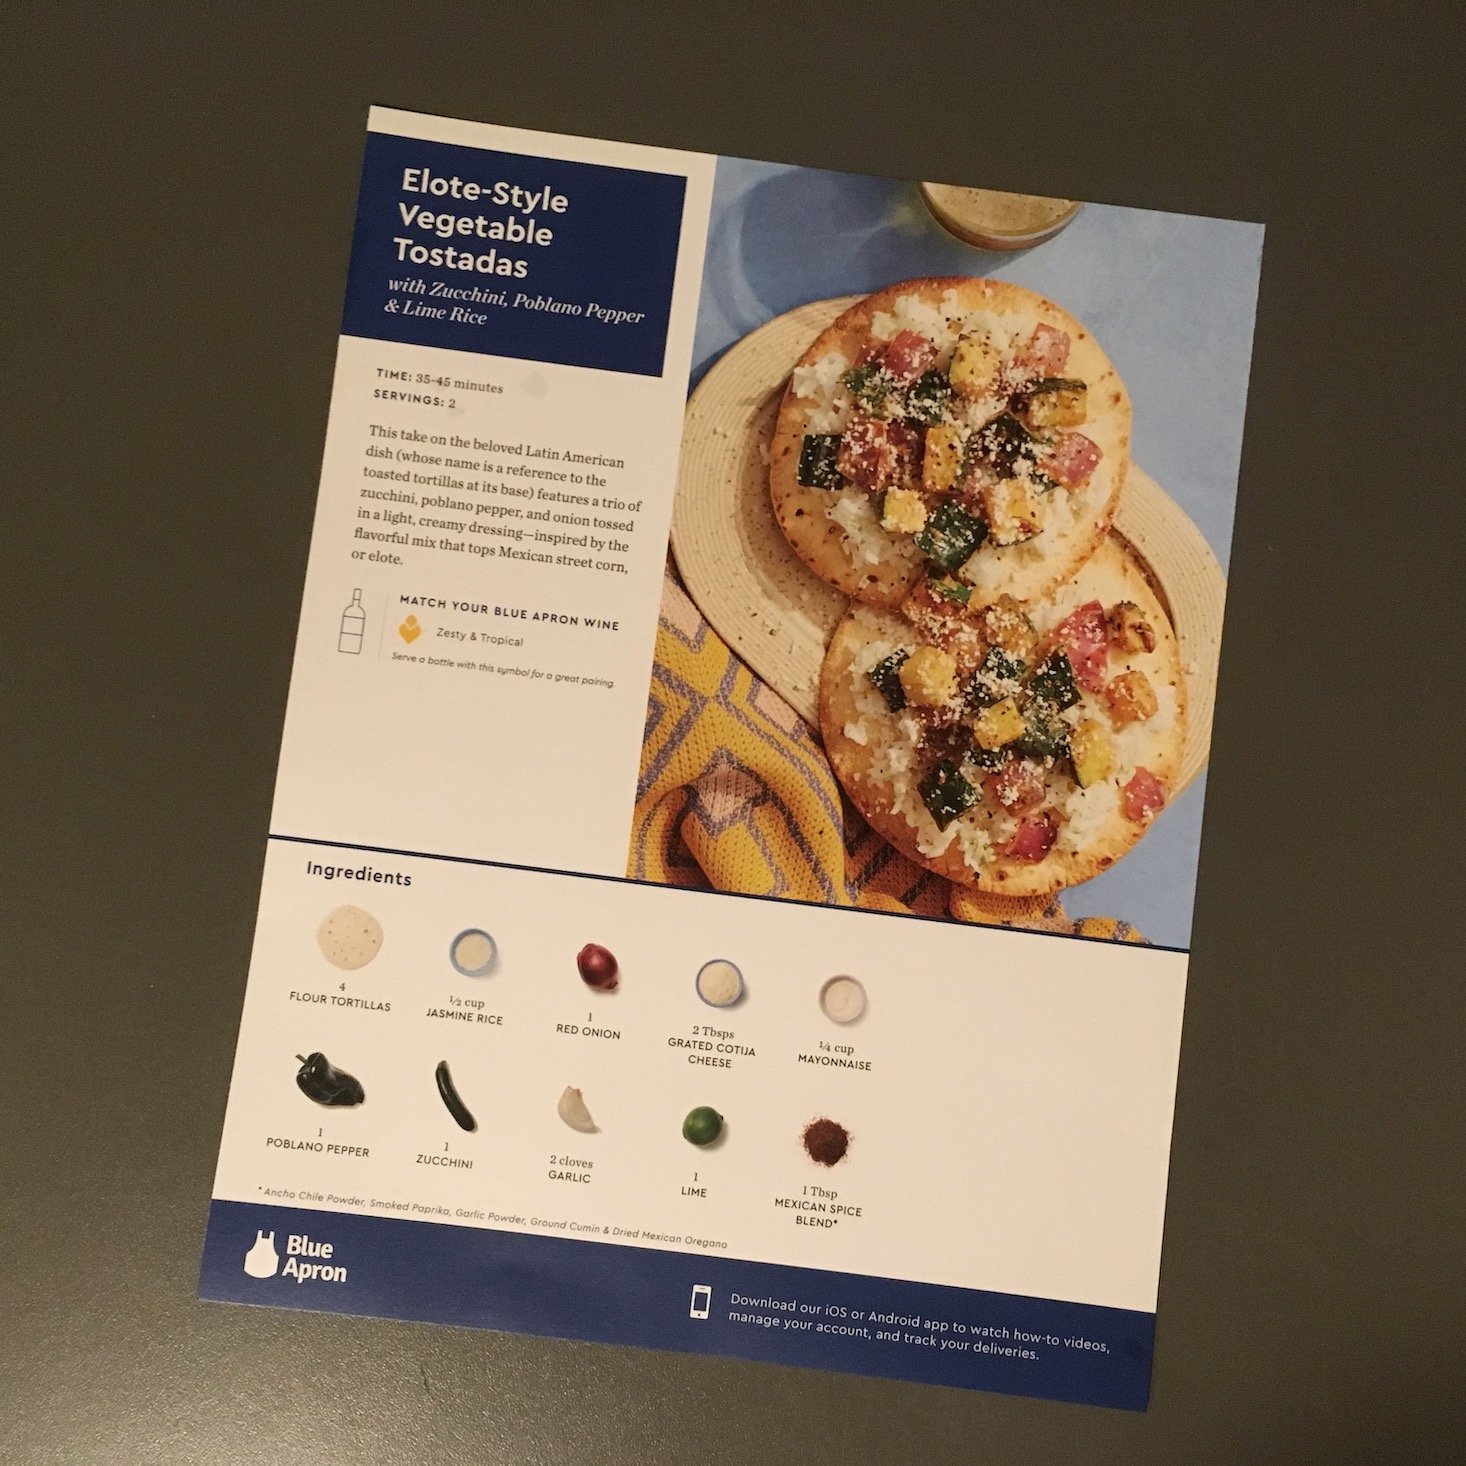 elote-style vegetable tostadas recipe card front